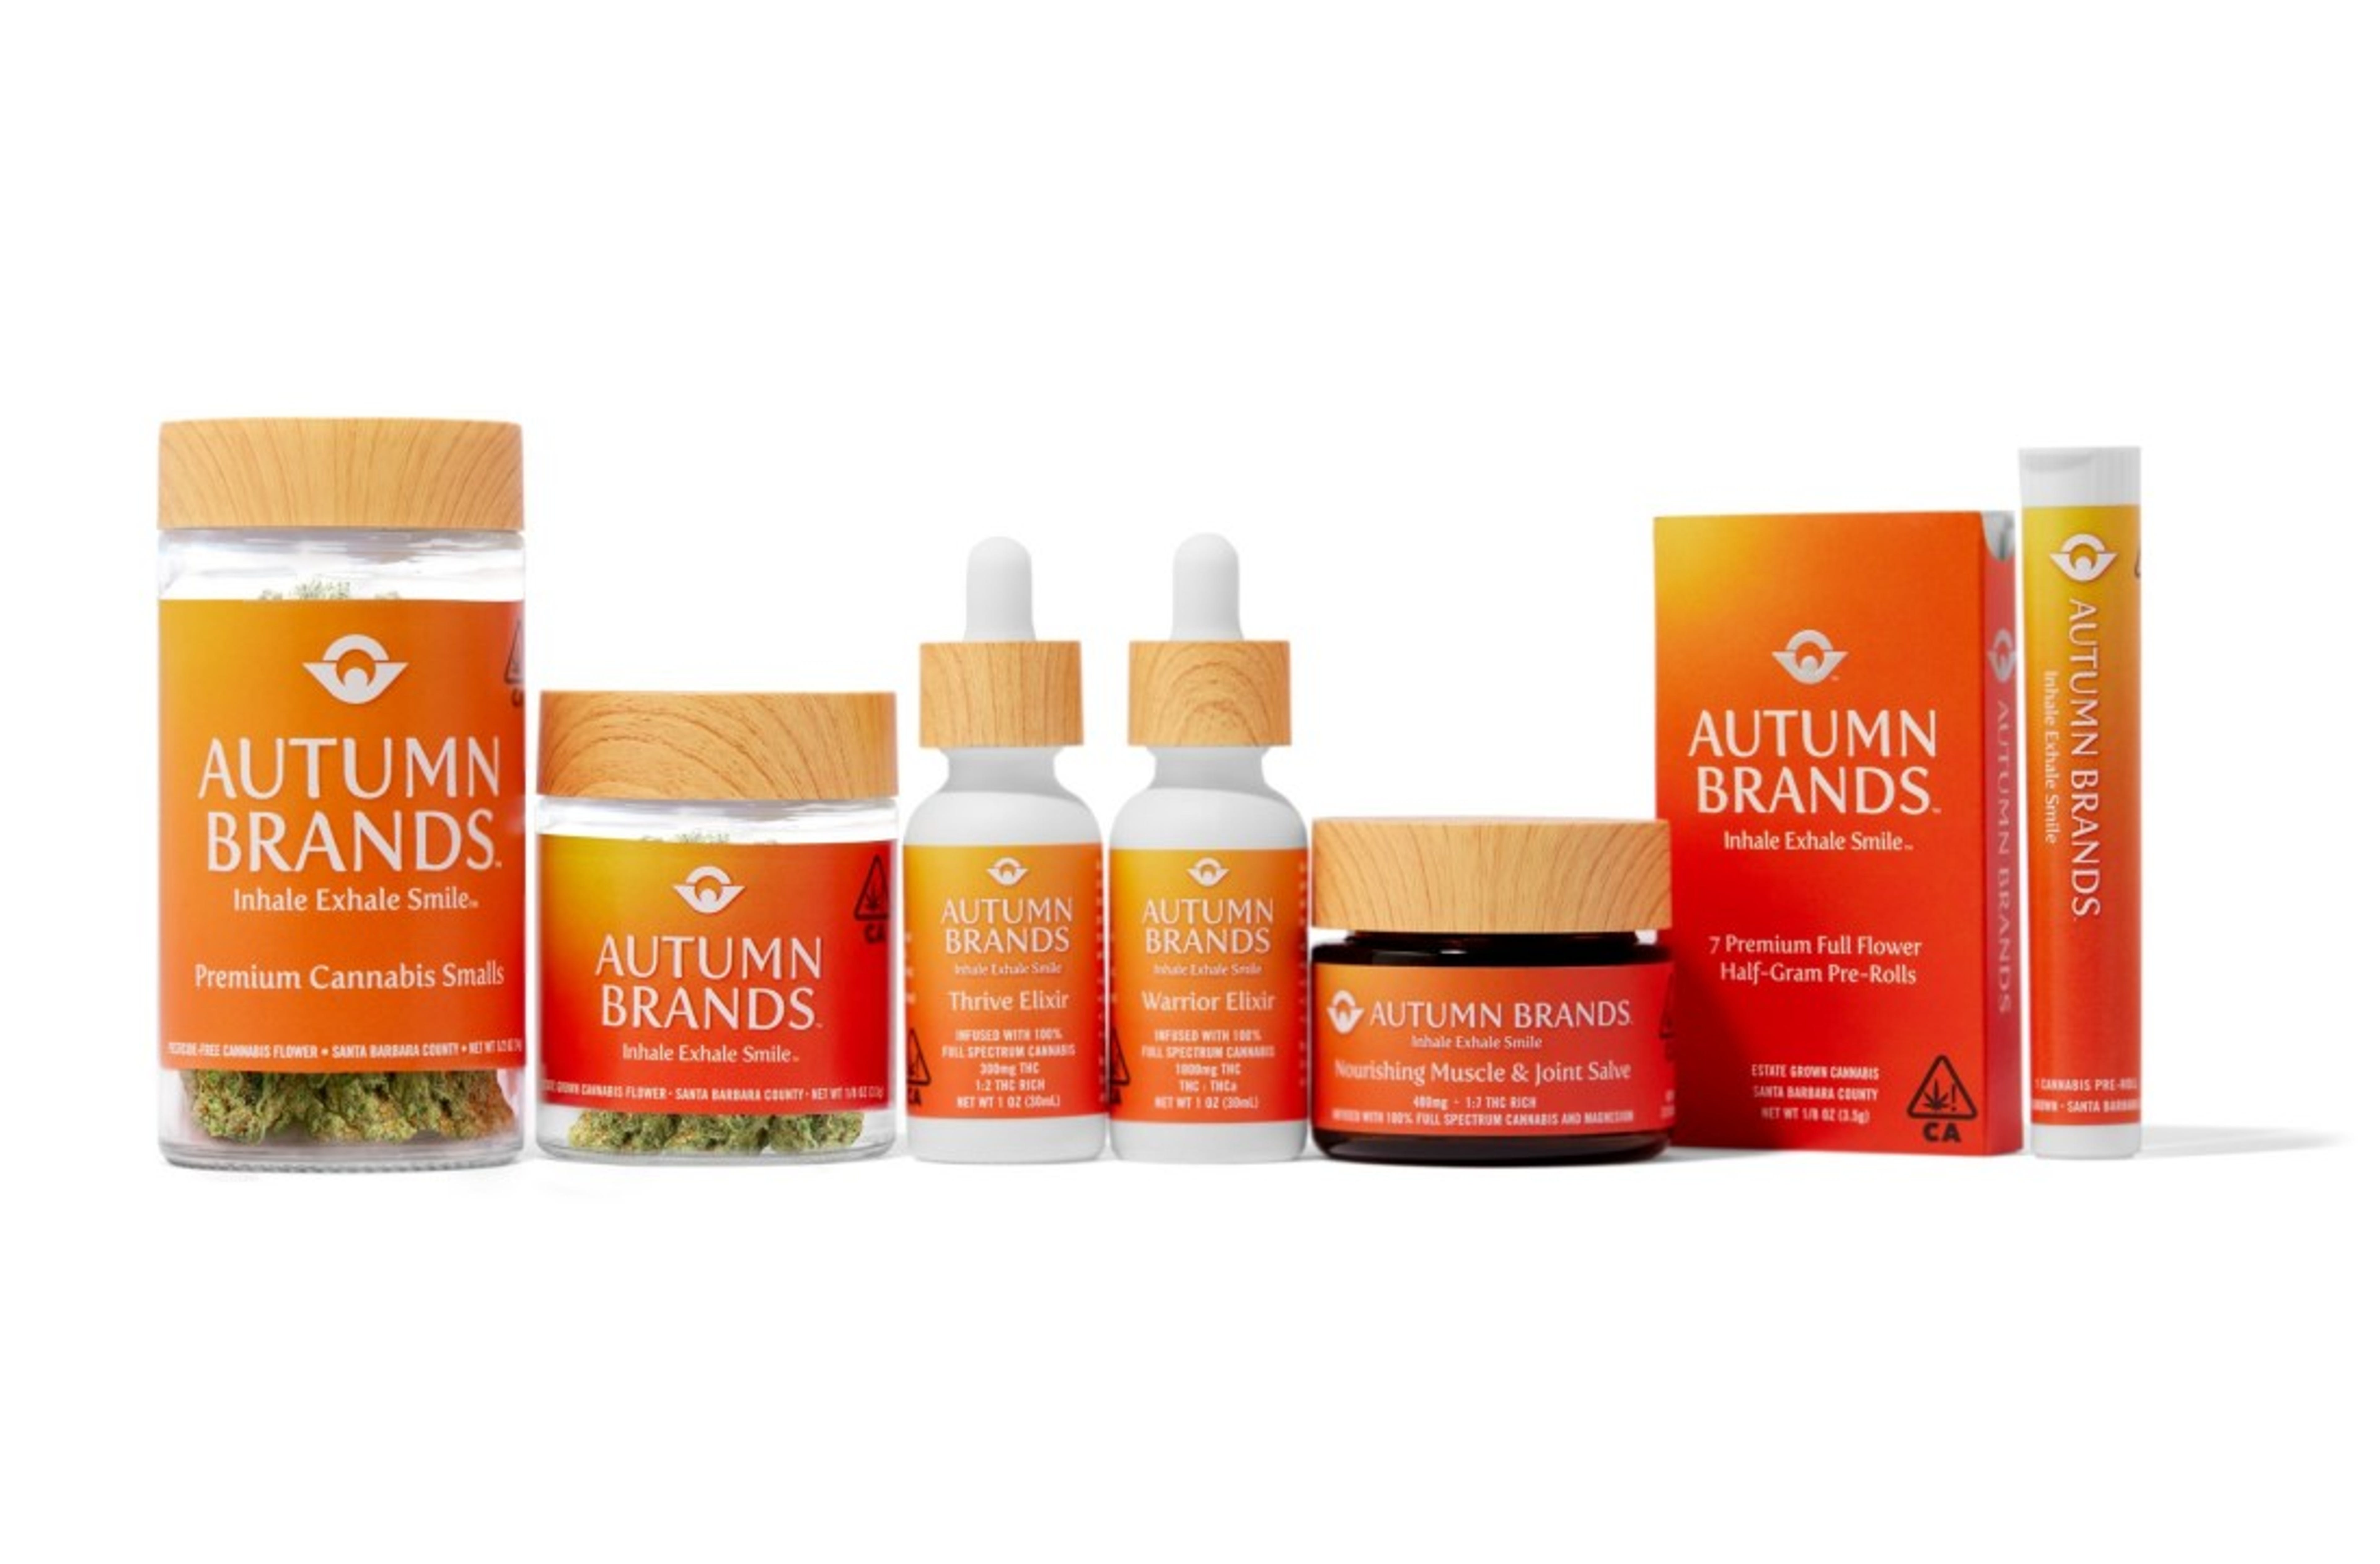 Autumn Brands Cannabis Now Has Direct-To-Consumer Delivery